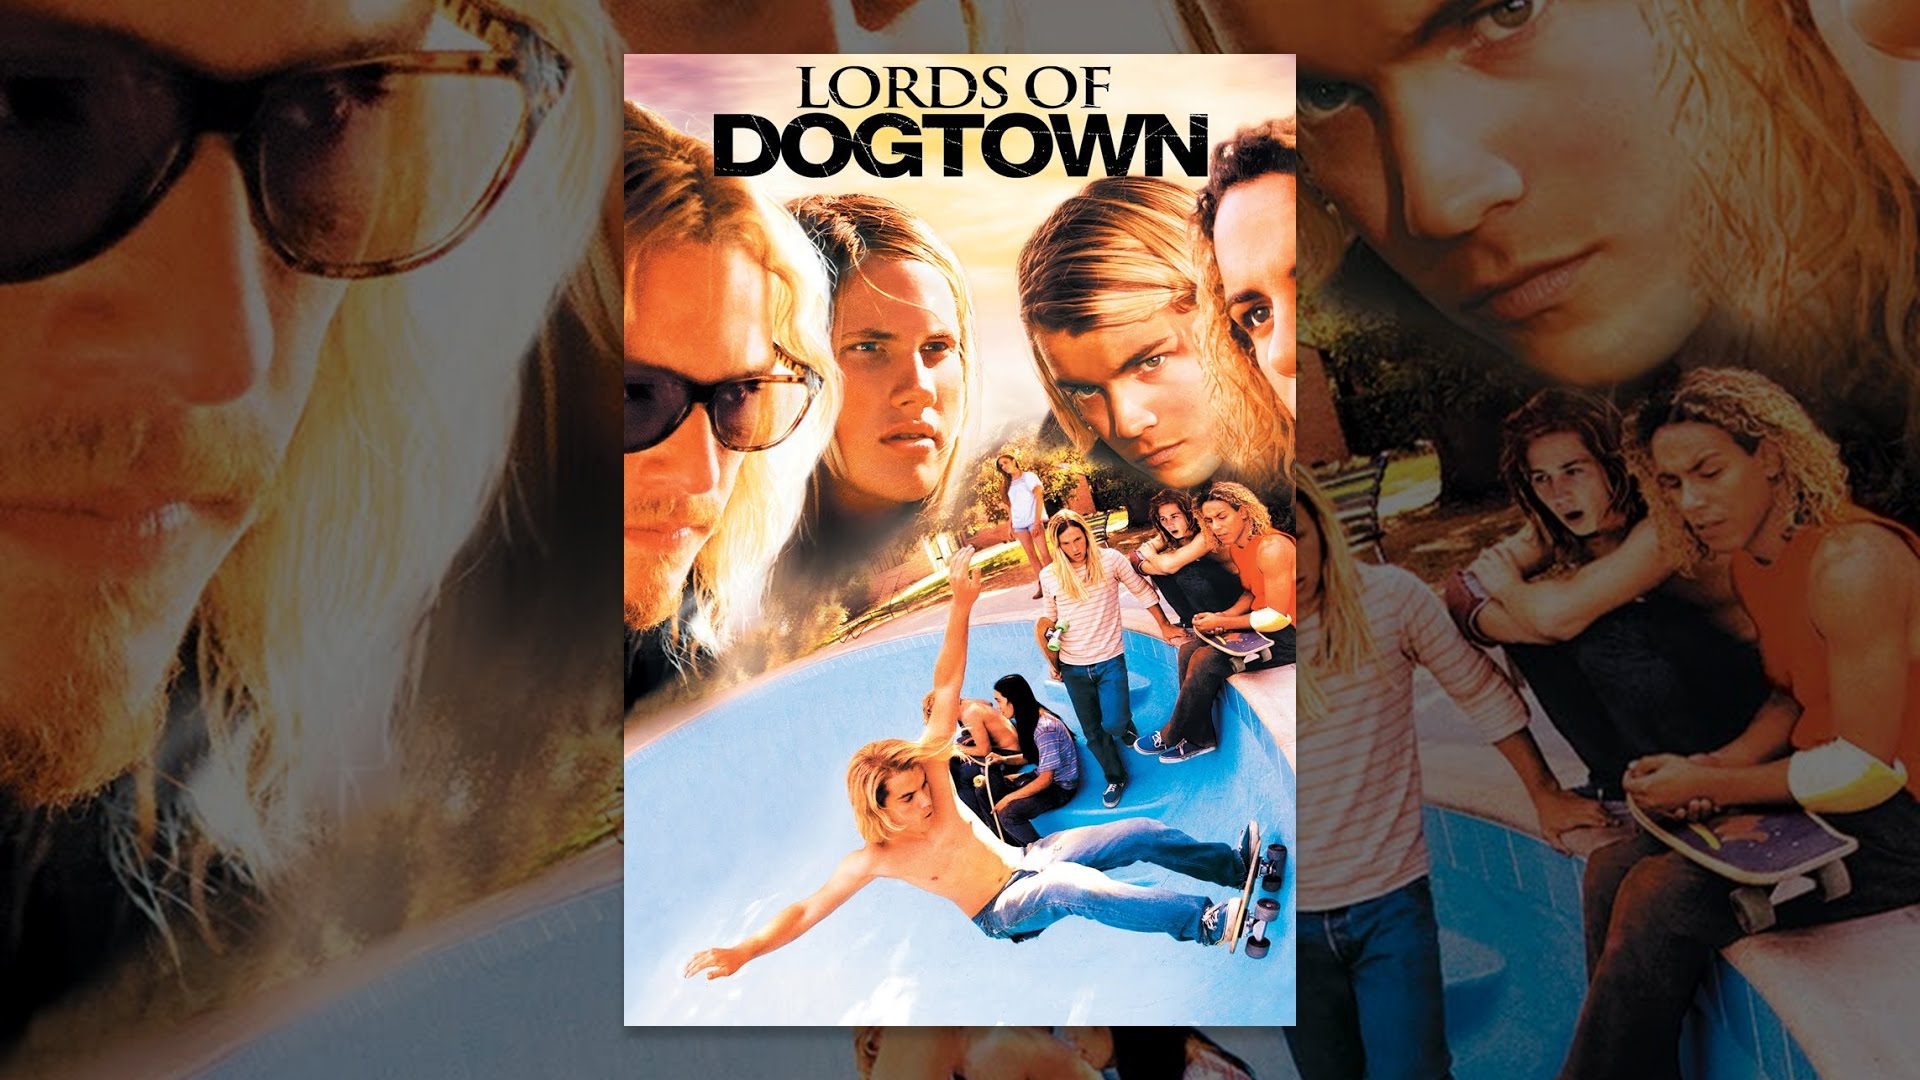 Back when the PSP came with the movie Lords of Dogtown, and ATV Offroad  Fury watched Lords of Dogtown so many times. Great memories! :  r/nostalgia